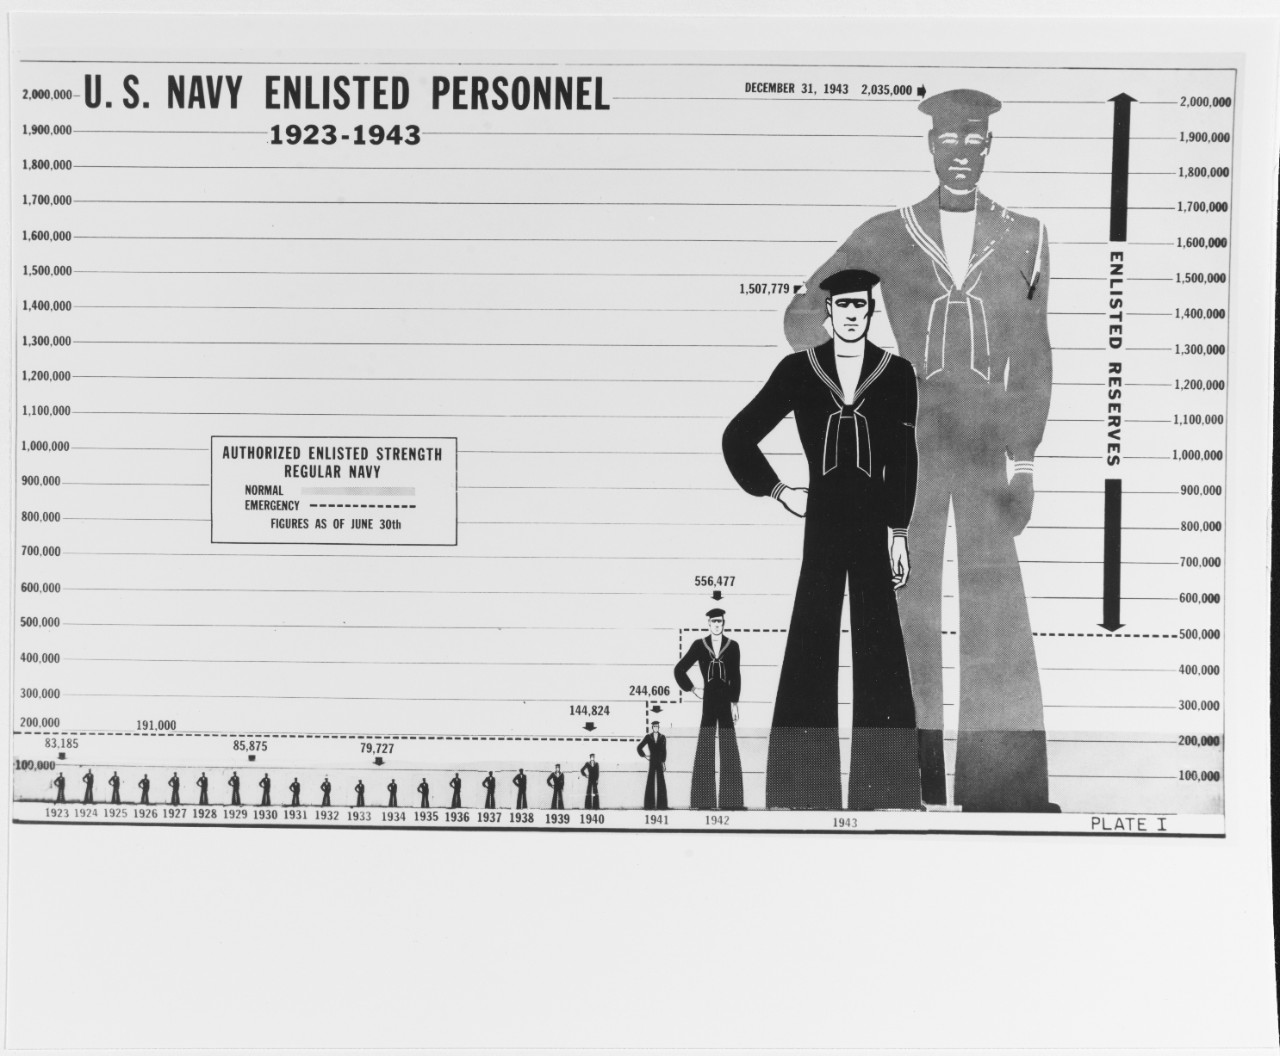 "U.S. Navy enlisted personnel, 1923-1943"